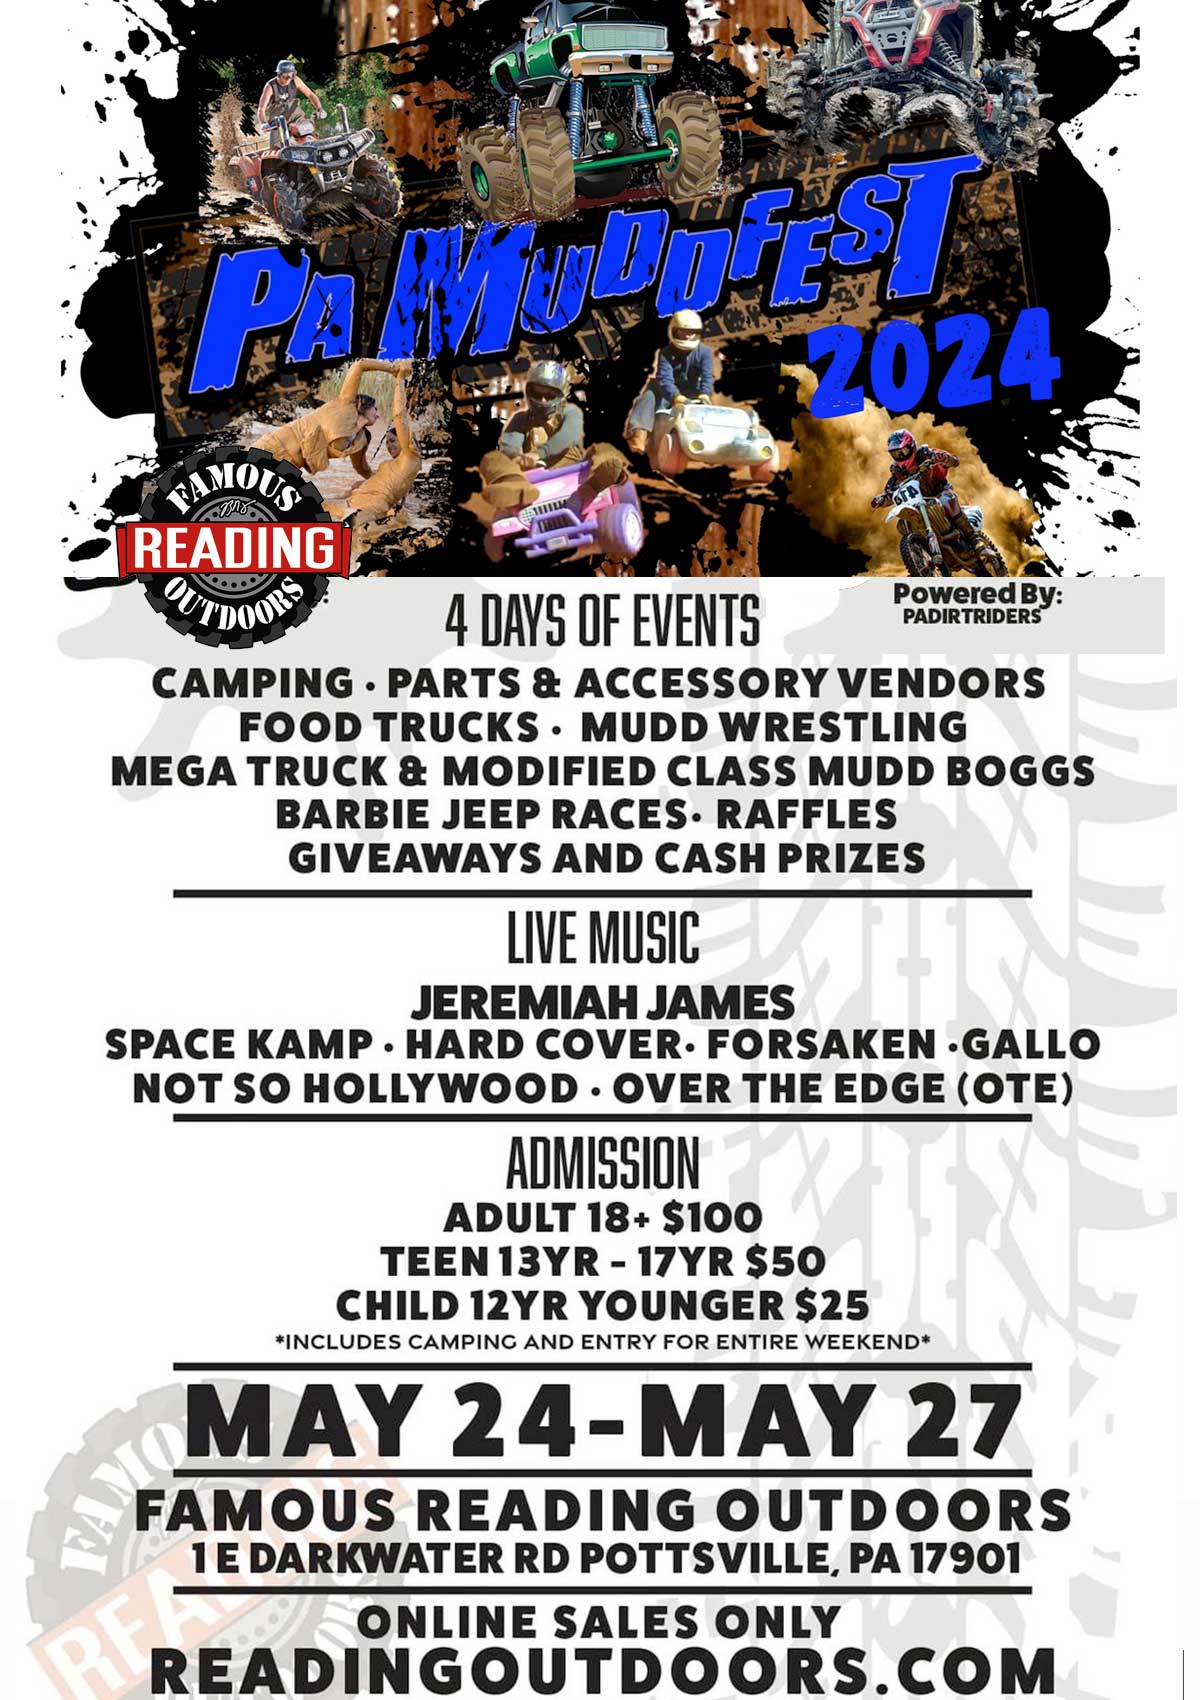 FRO Events - PA MUDD FEST - May 24-27, 2024